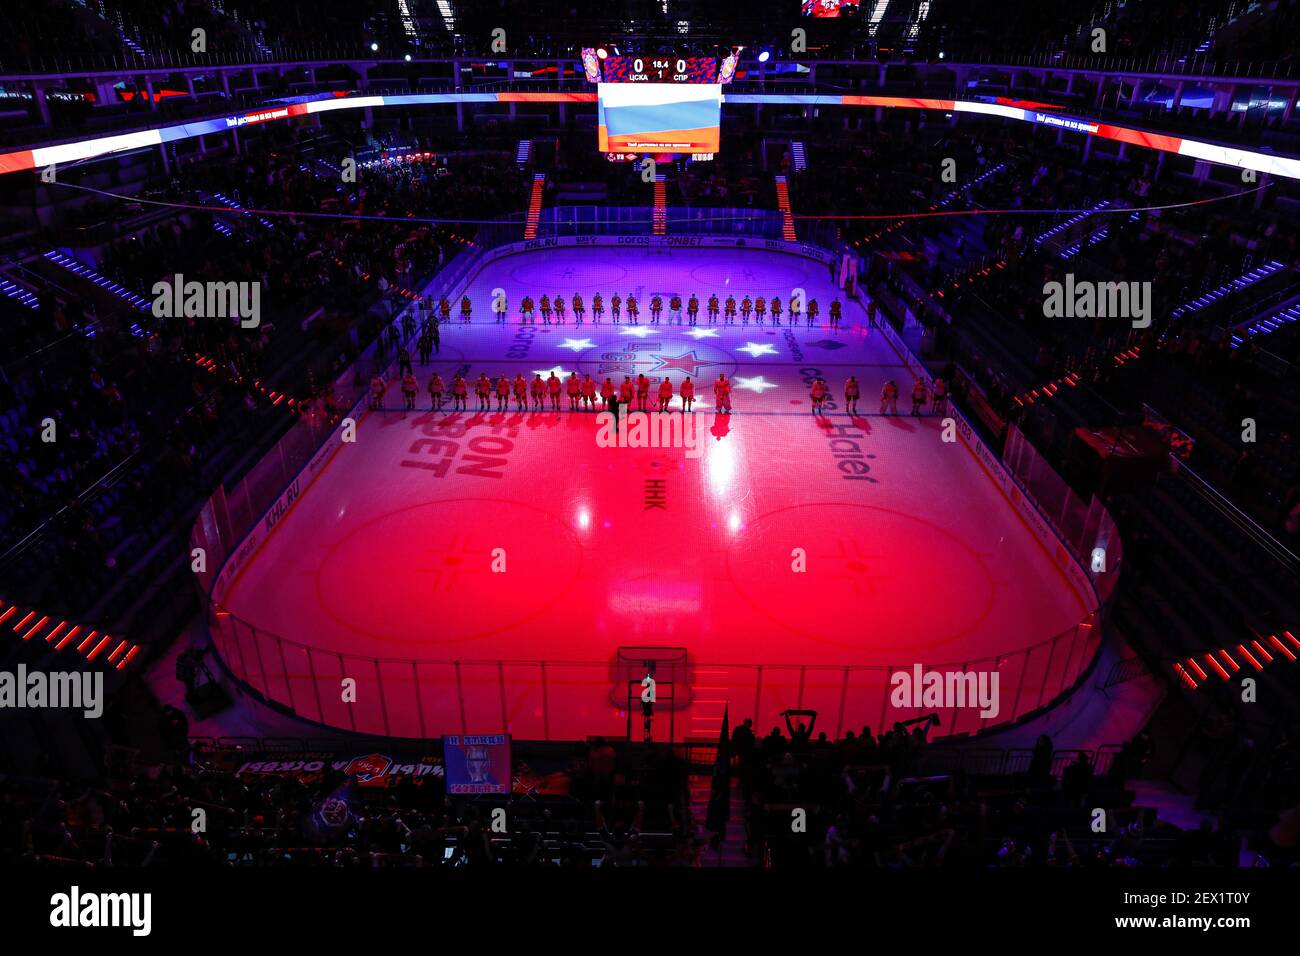 Moscow, Russia. 3rd March, 2021. KHL Regular Season ice hockey match: CSKA Moscow Vs Spartak Moscow - Moscow CSKA Arena. View of the arena with the li Stock Photo